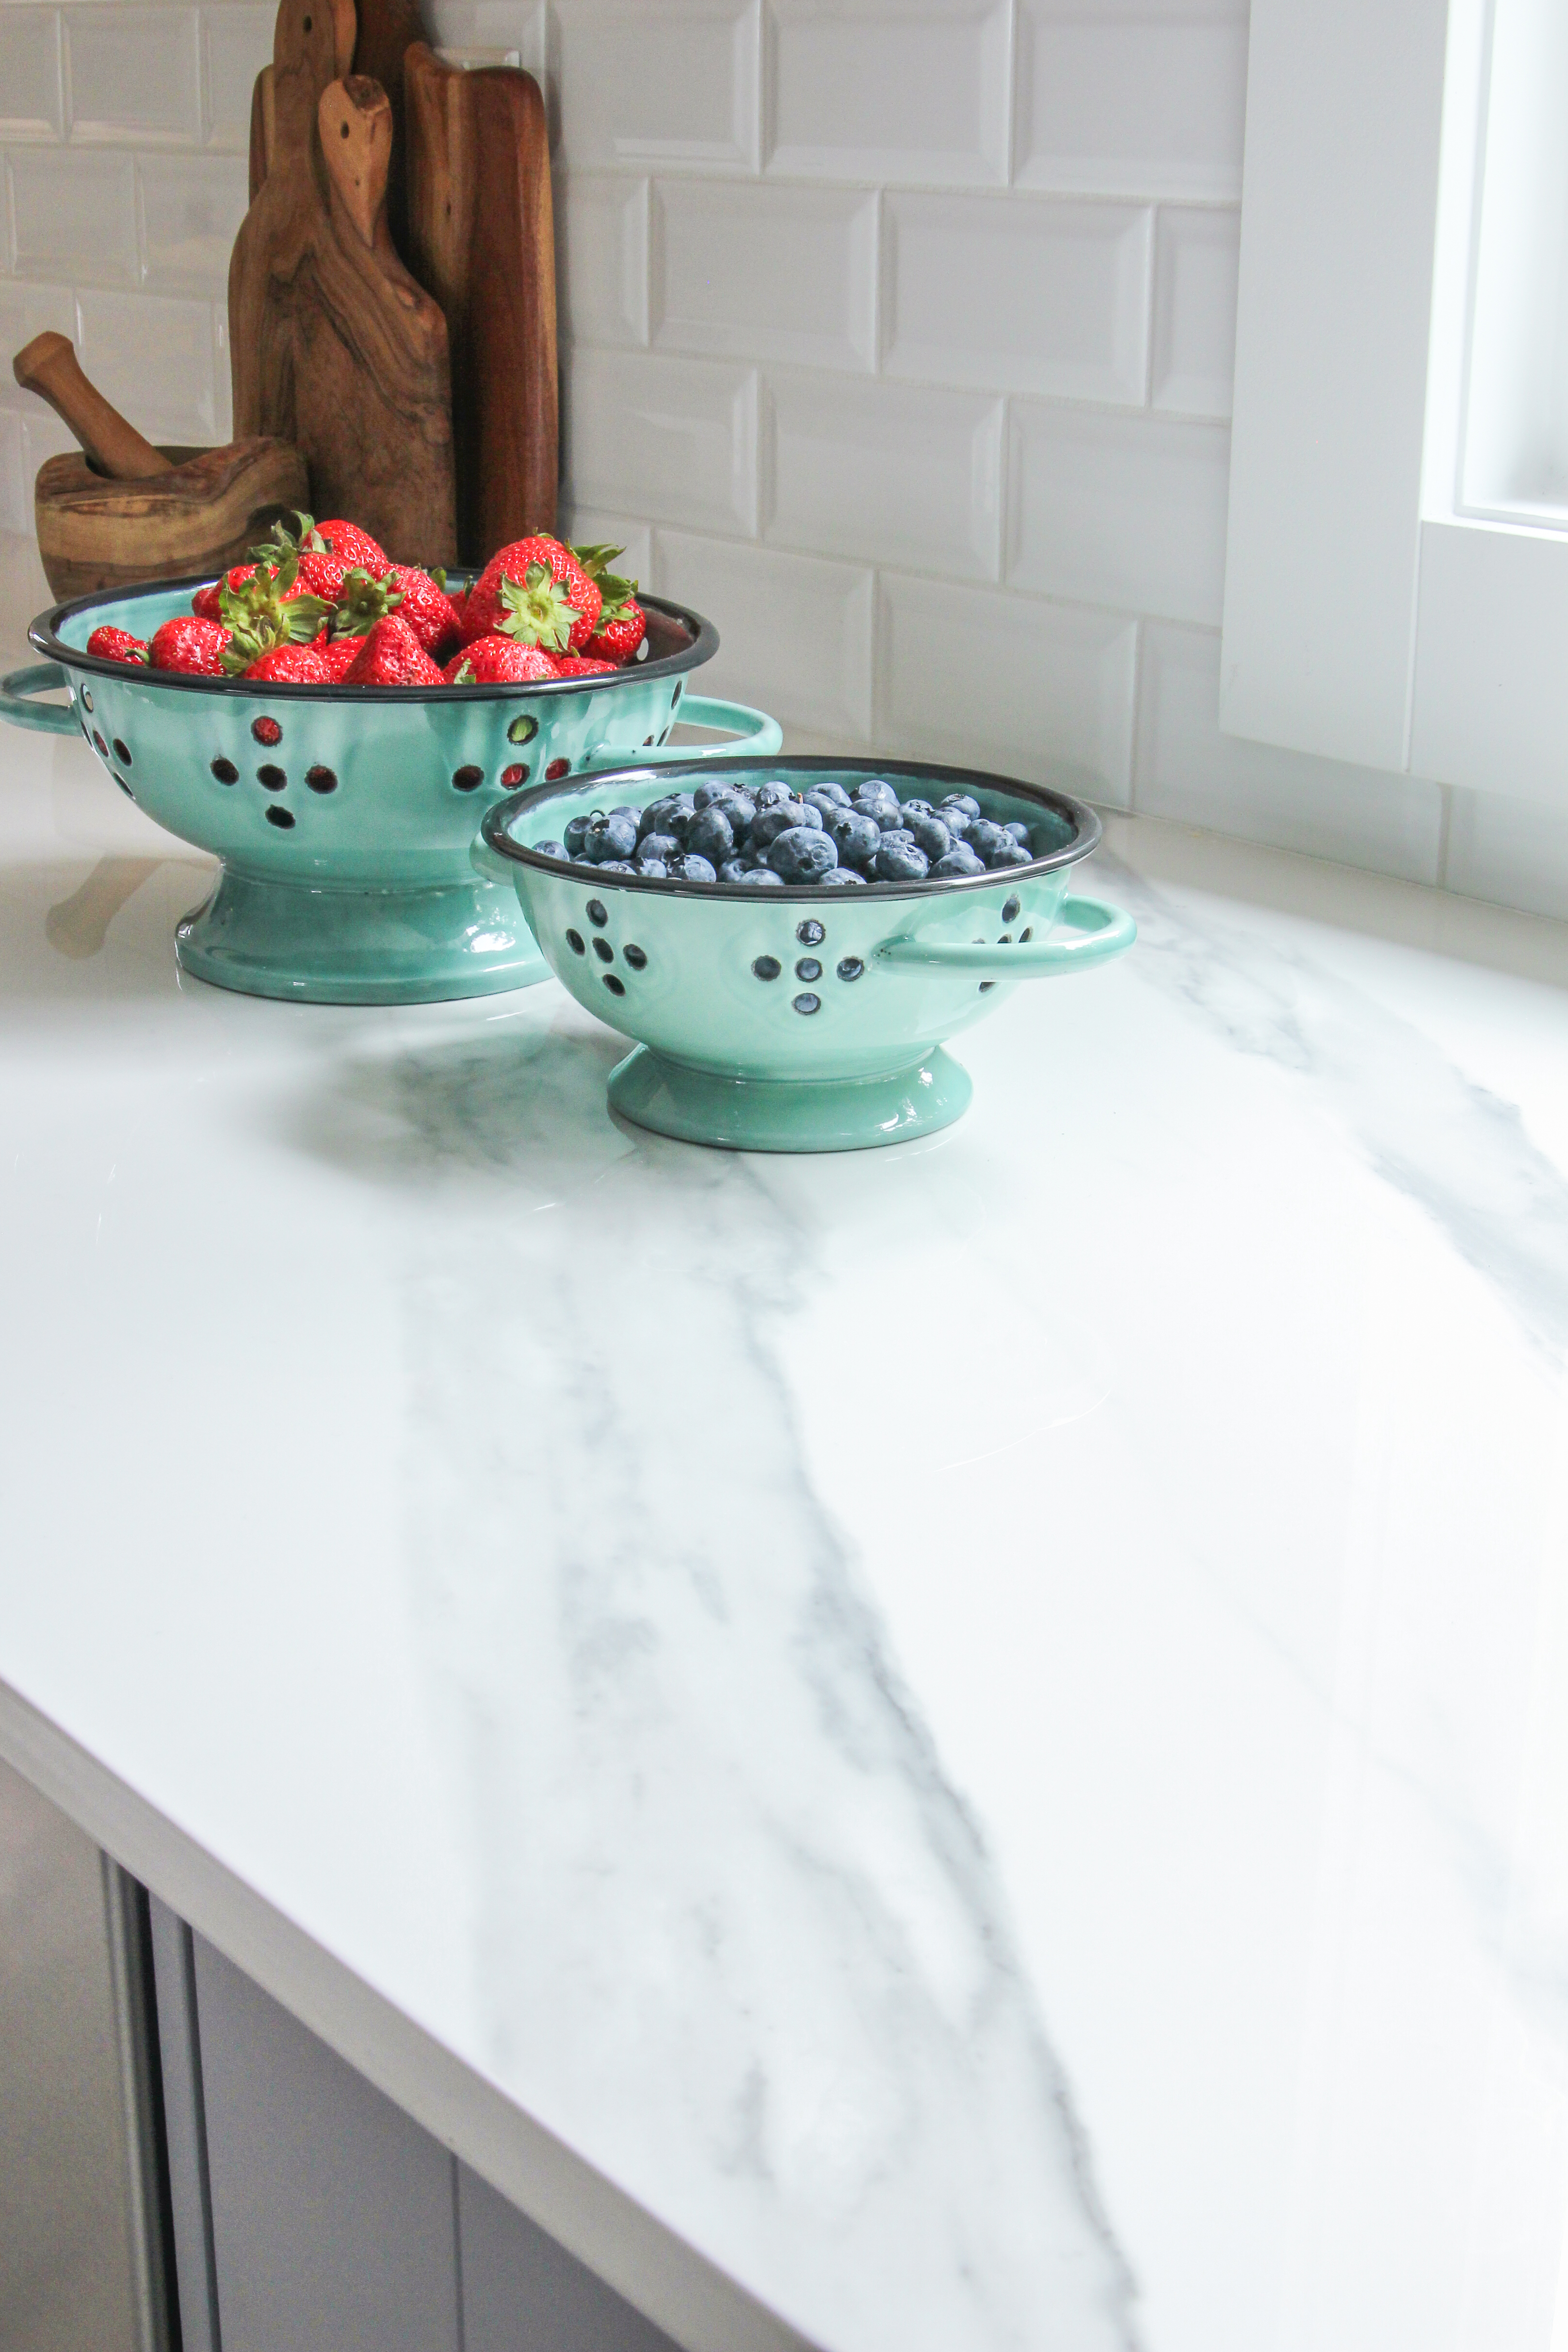 Solid Surface Countertop Options Pros and Cons